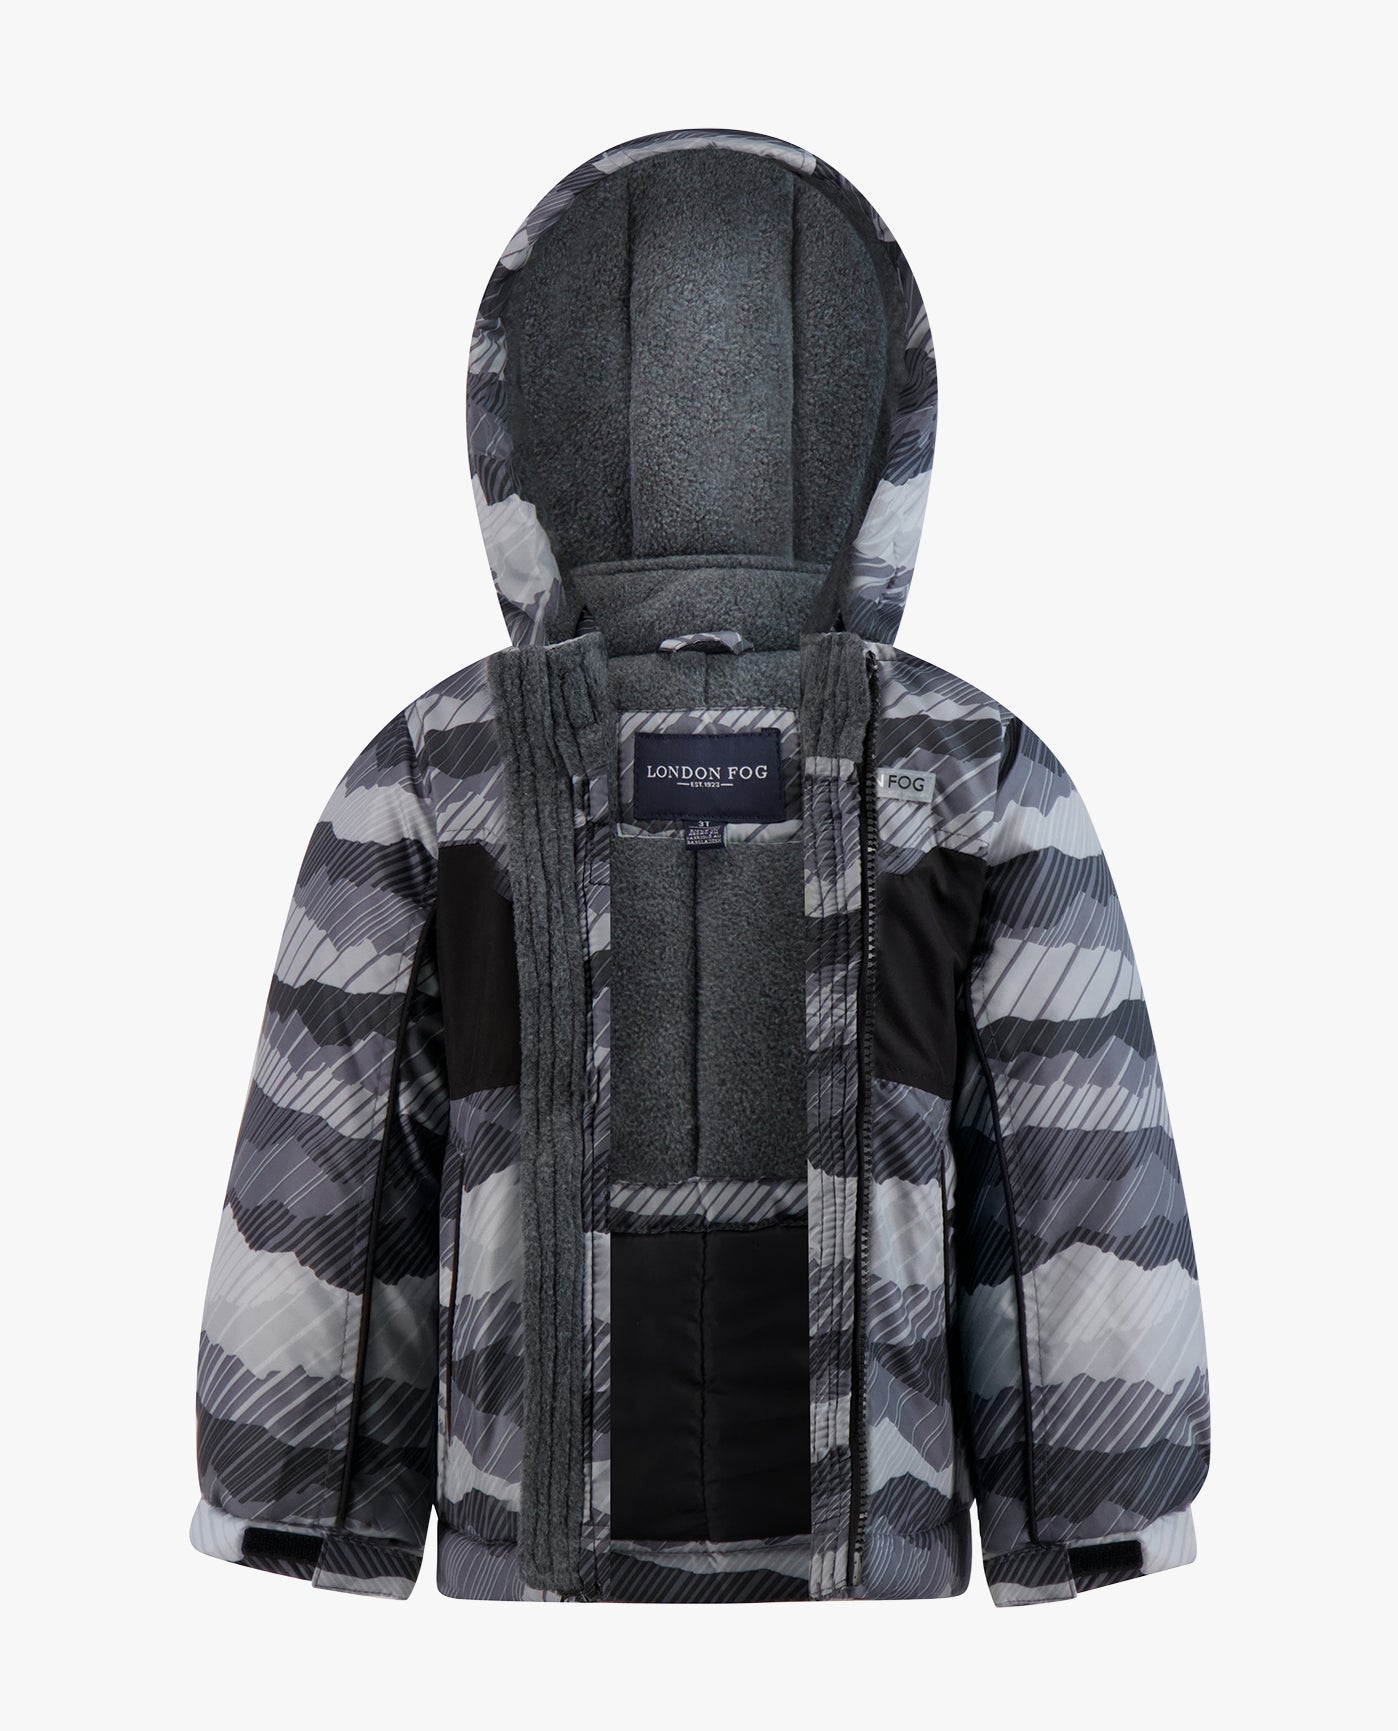 OPEN VIEW OF BIG BOYS ZIP-FRONT HOODED JACKET WITH OVERALL SNOW PANT | GREY PRINT